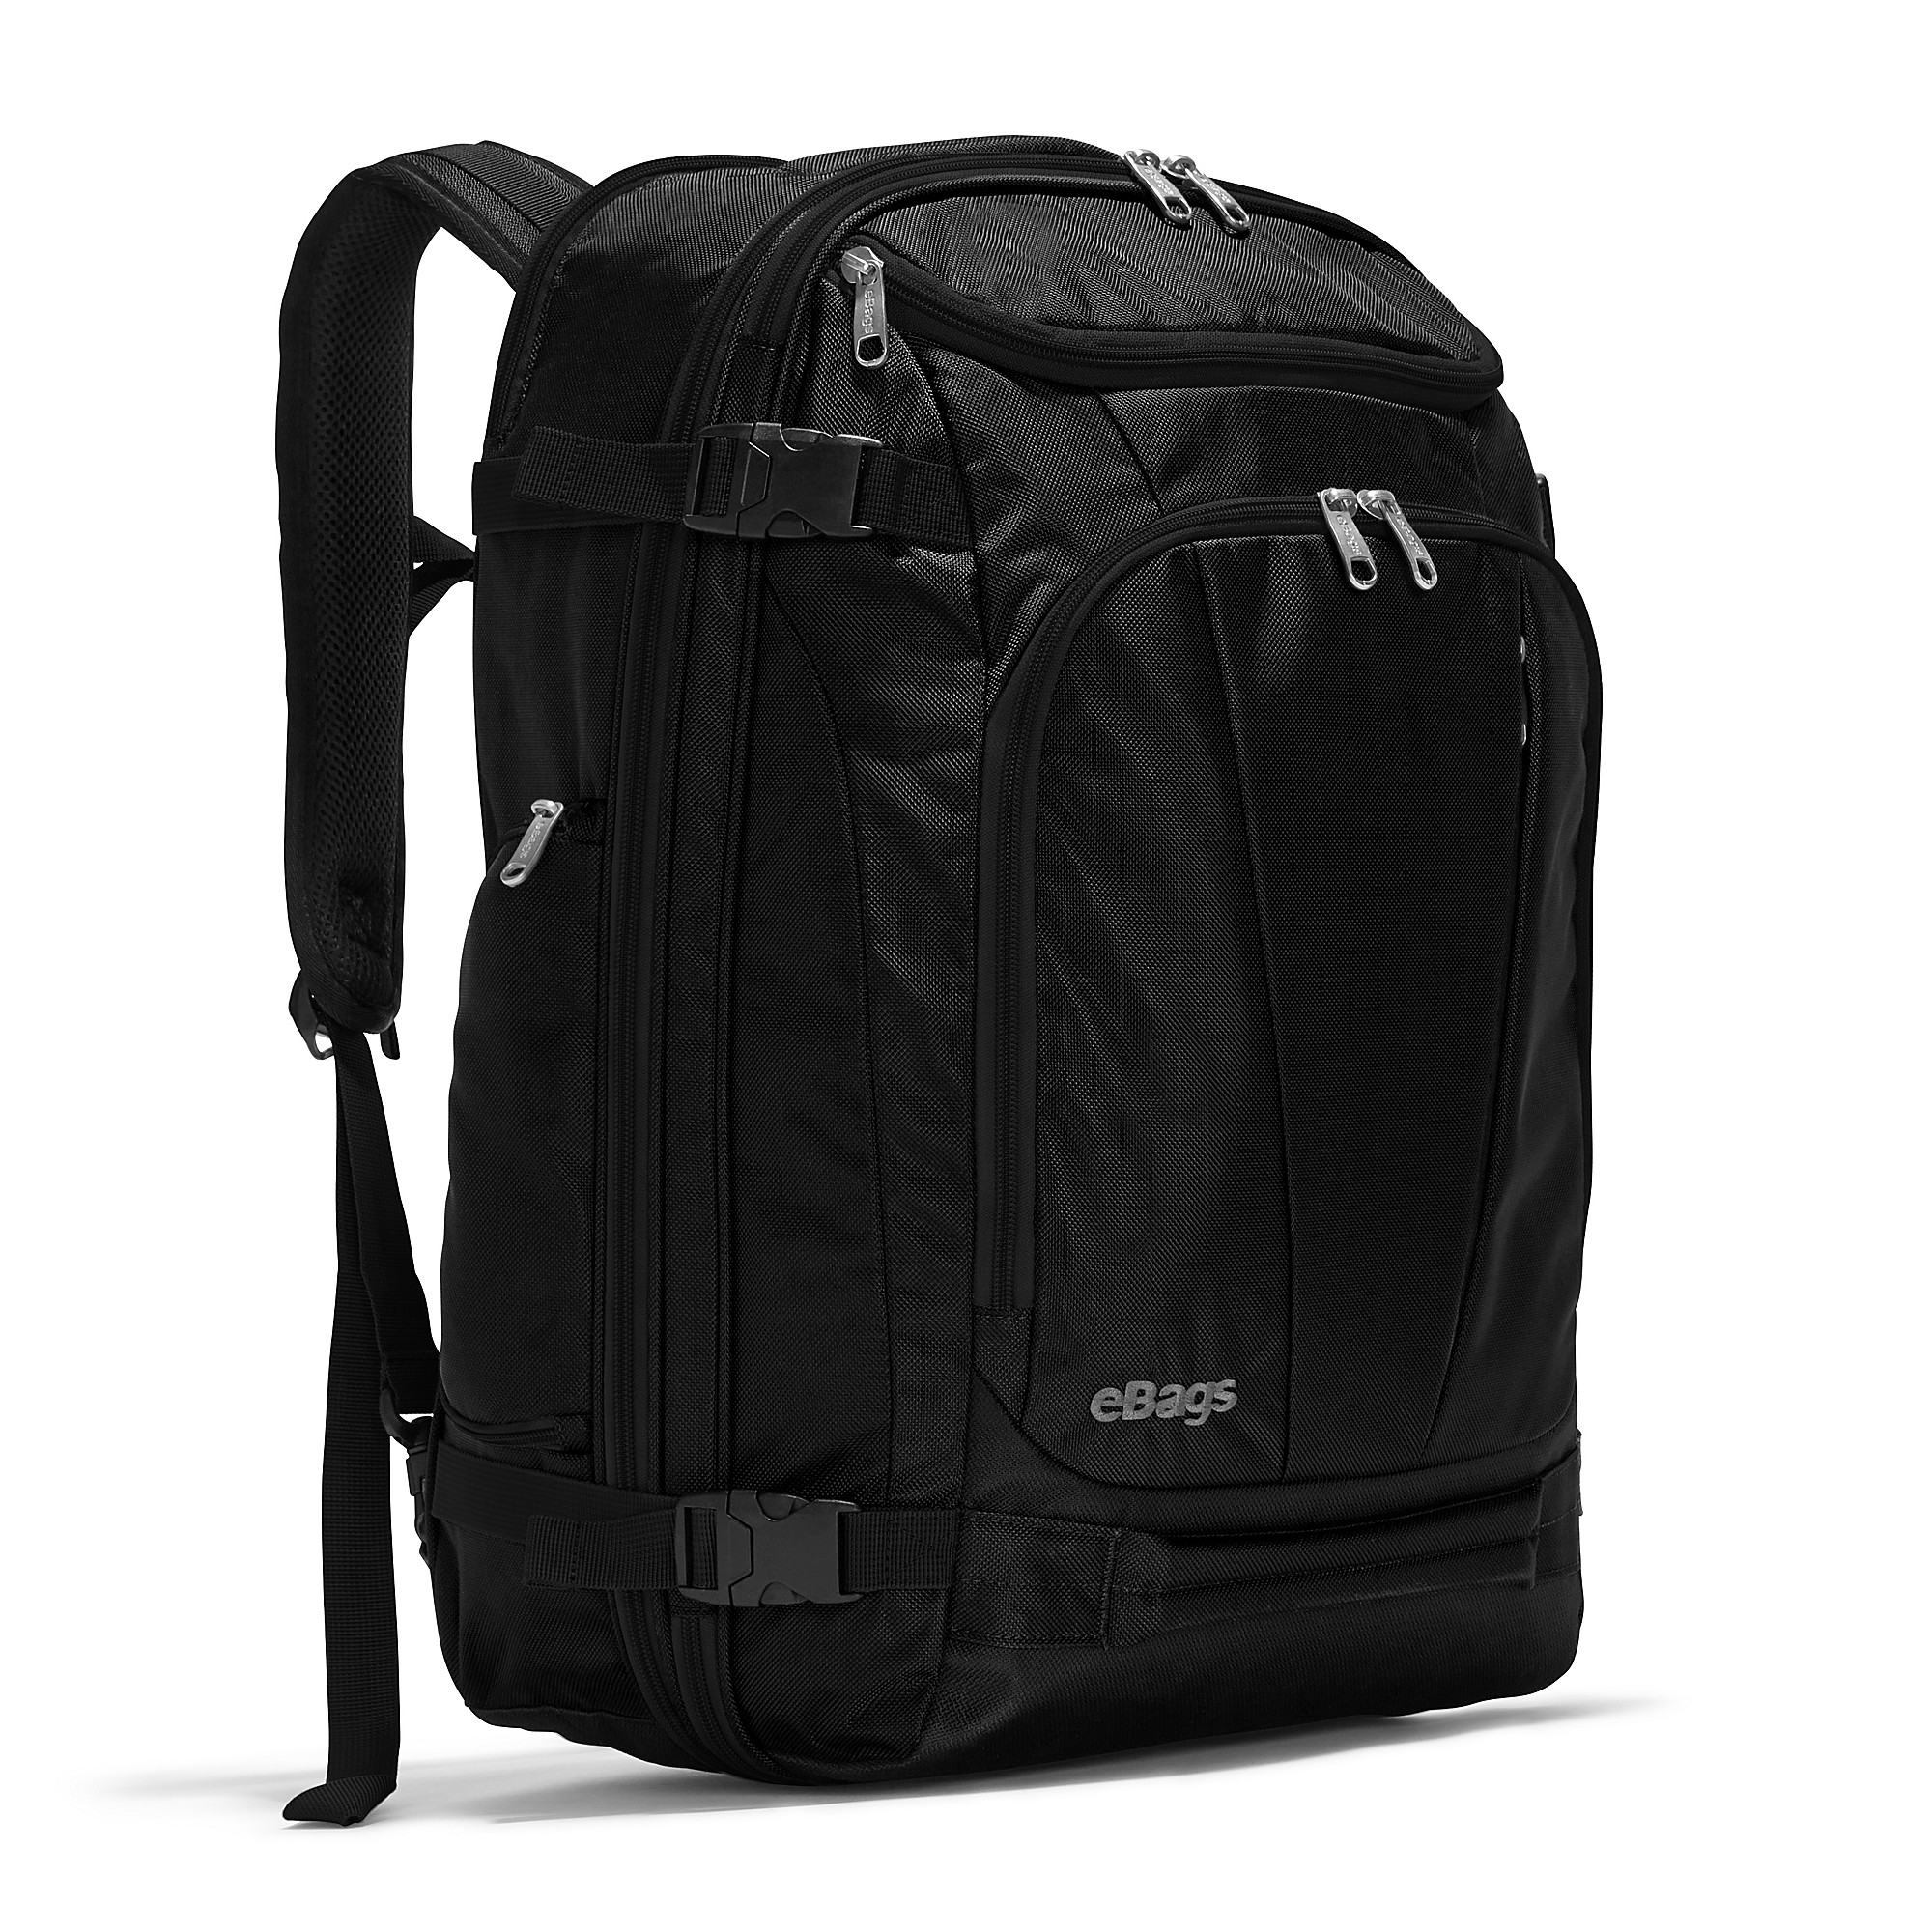 ebags Mother Lode Travel Backpack - Bags